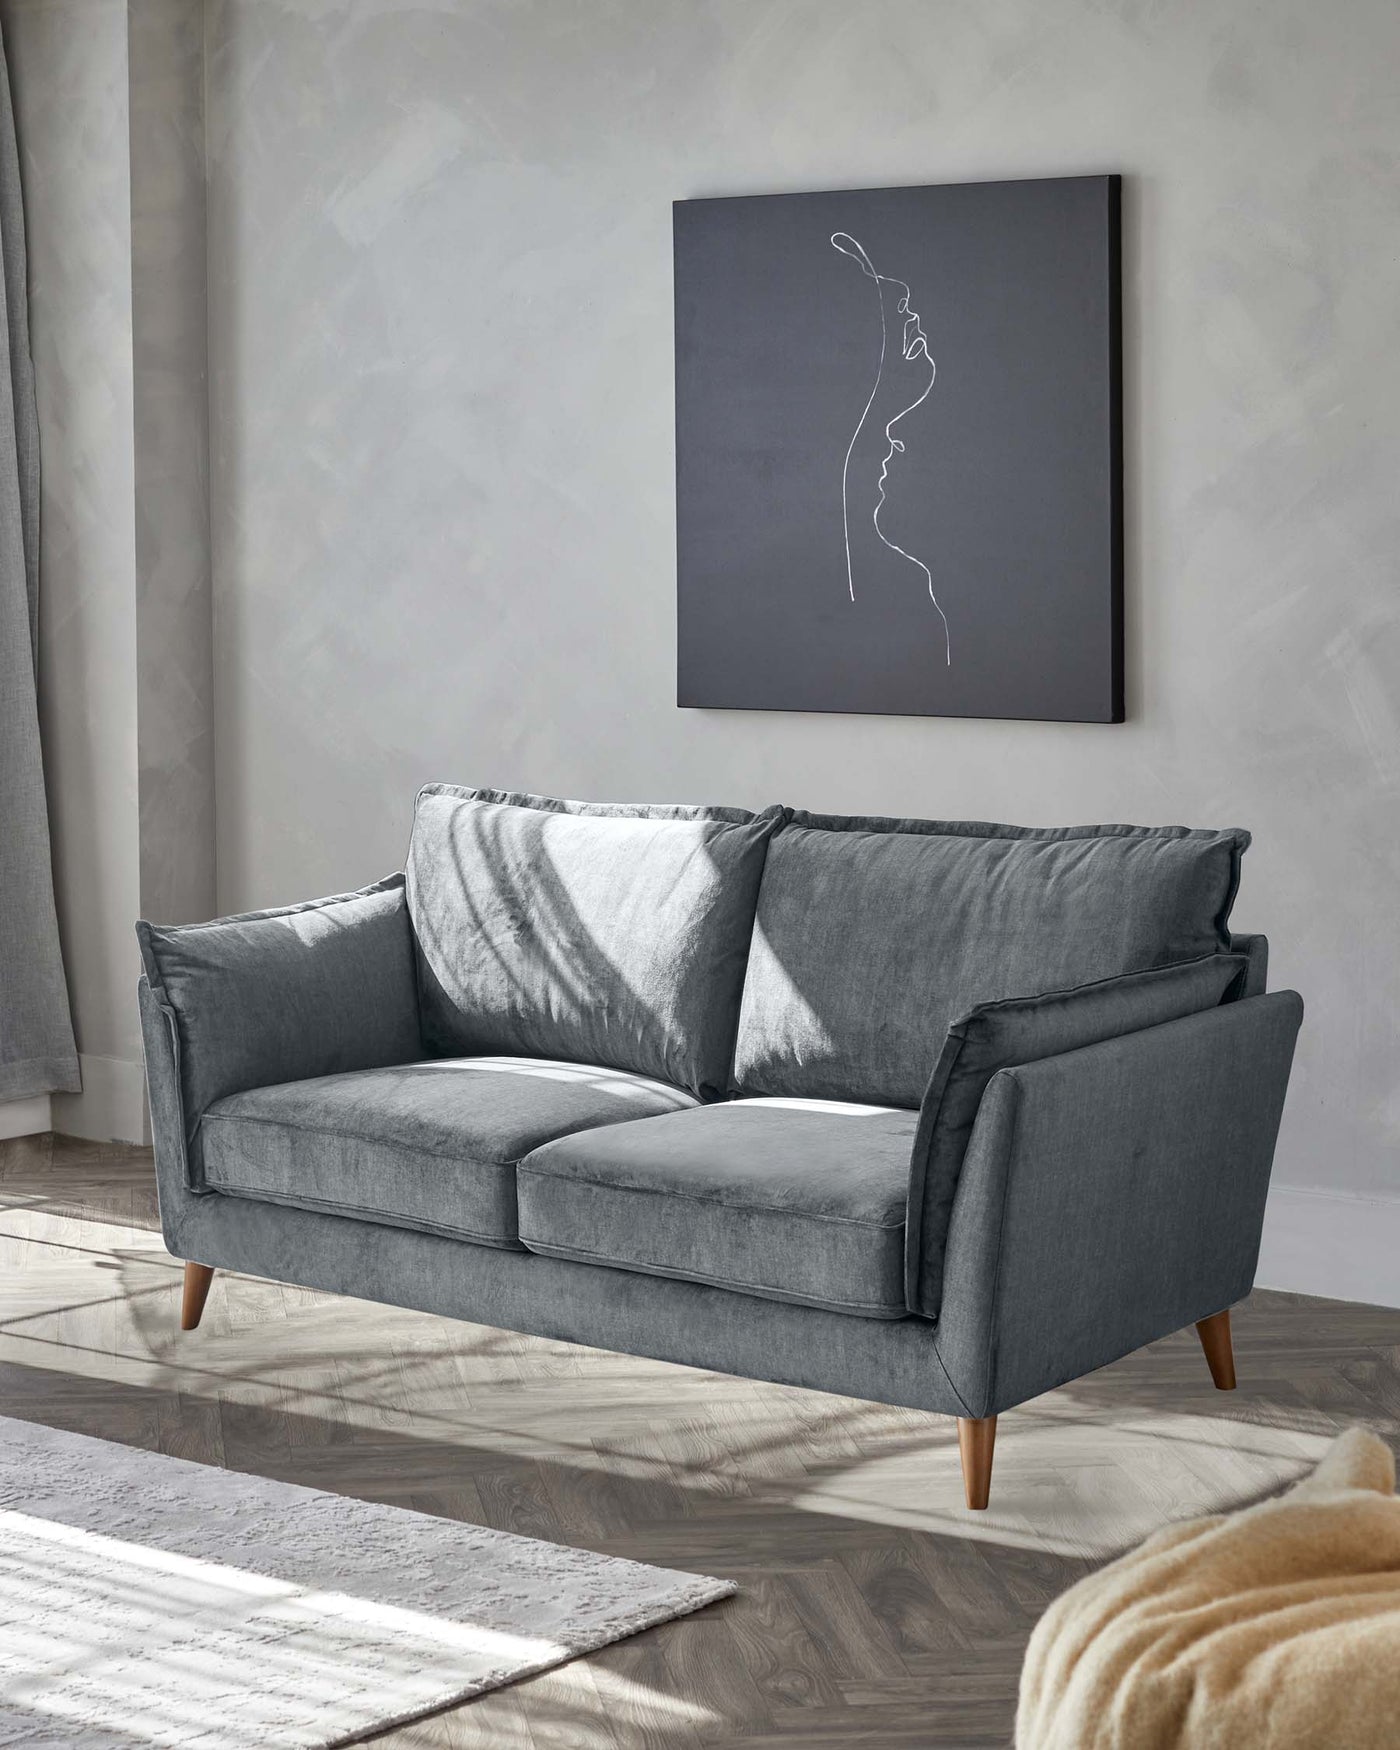 Elegant modern sofa in a soft grey fabric with three plush seat cushions and three back cushions, featuring square arms and angled wooden legs. The setting includes a light grey area rug on hardwood flooring, with a textured throw blanket partially visible in the foreground.